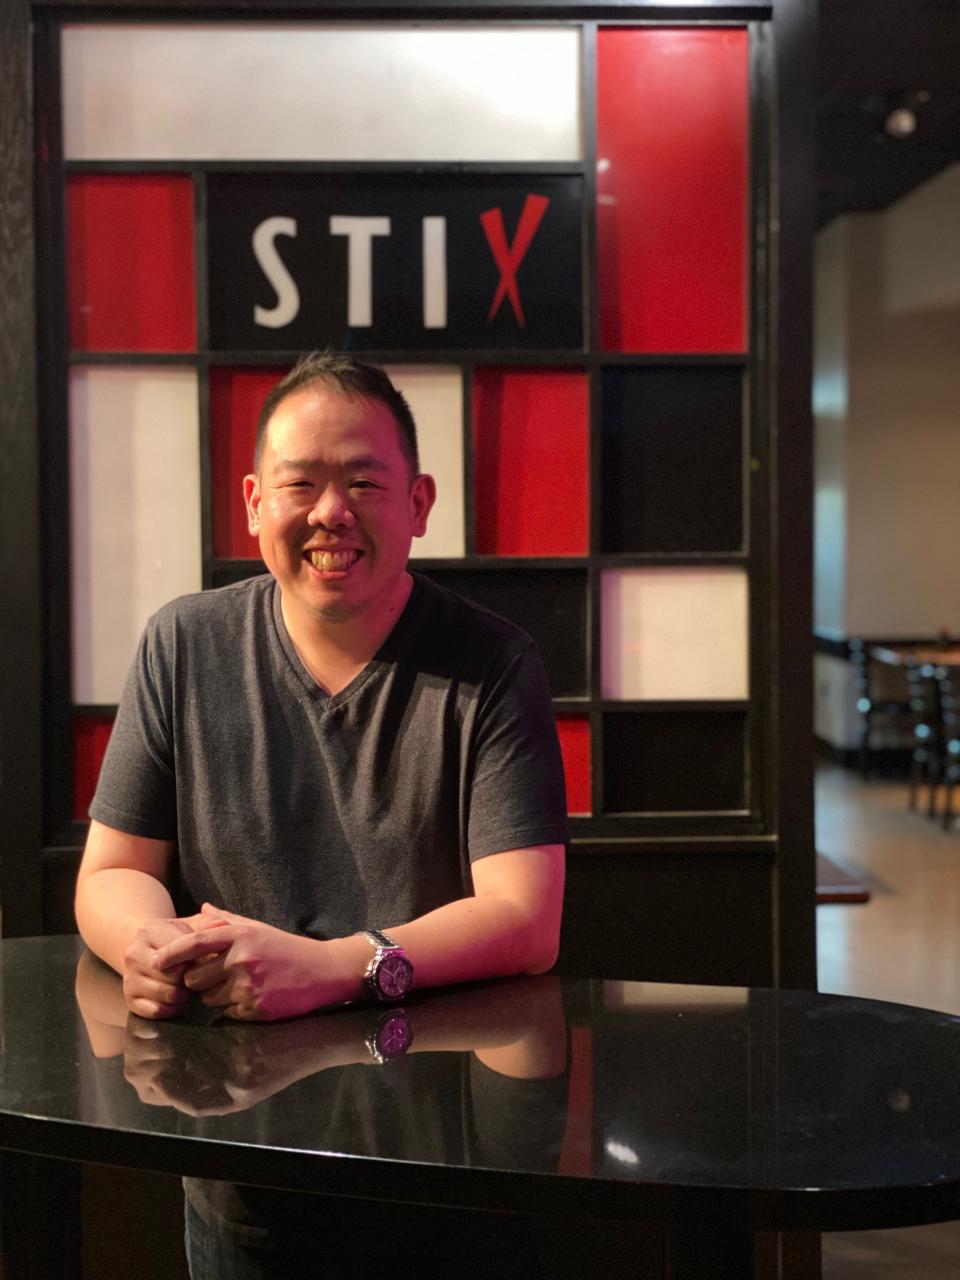 Wayne Yeh, owner of STIX Collierville and STIX Express Downtown